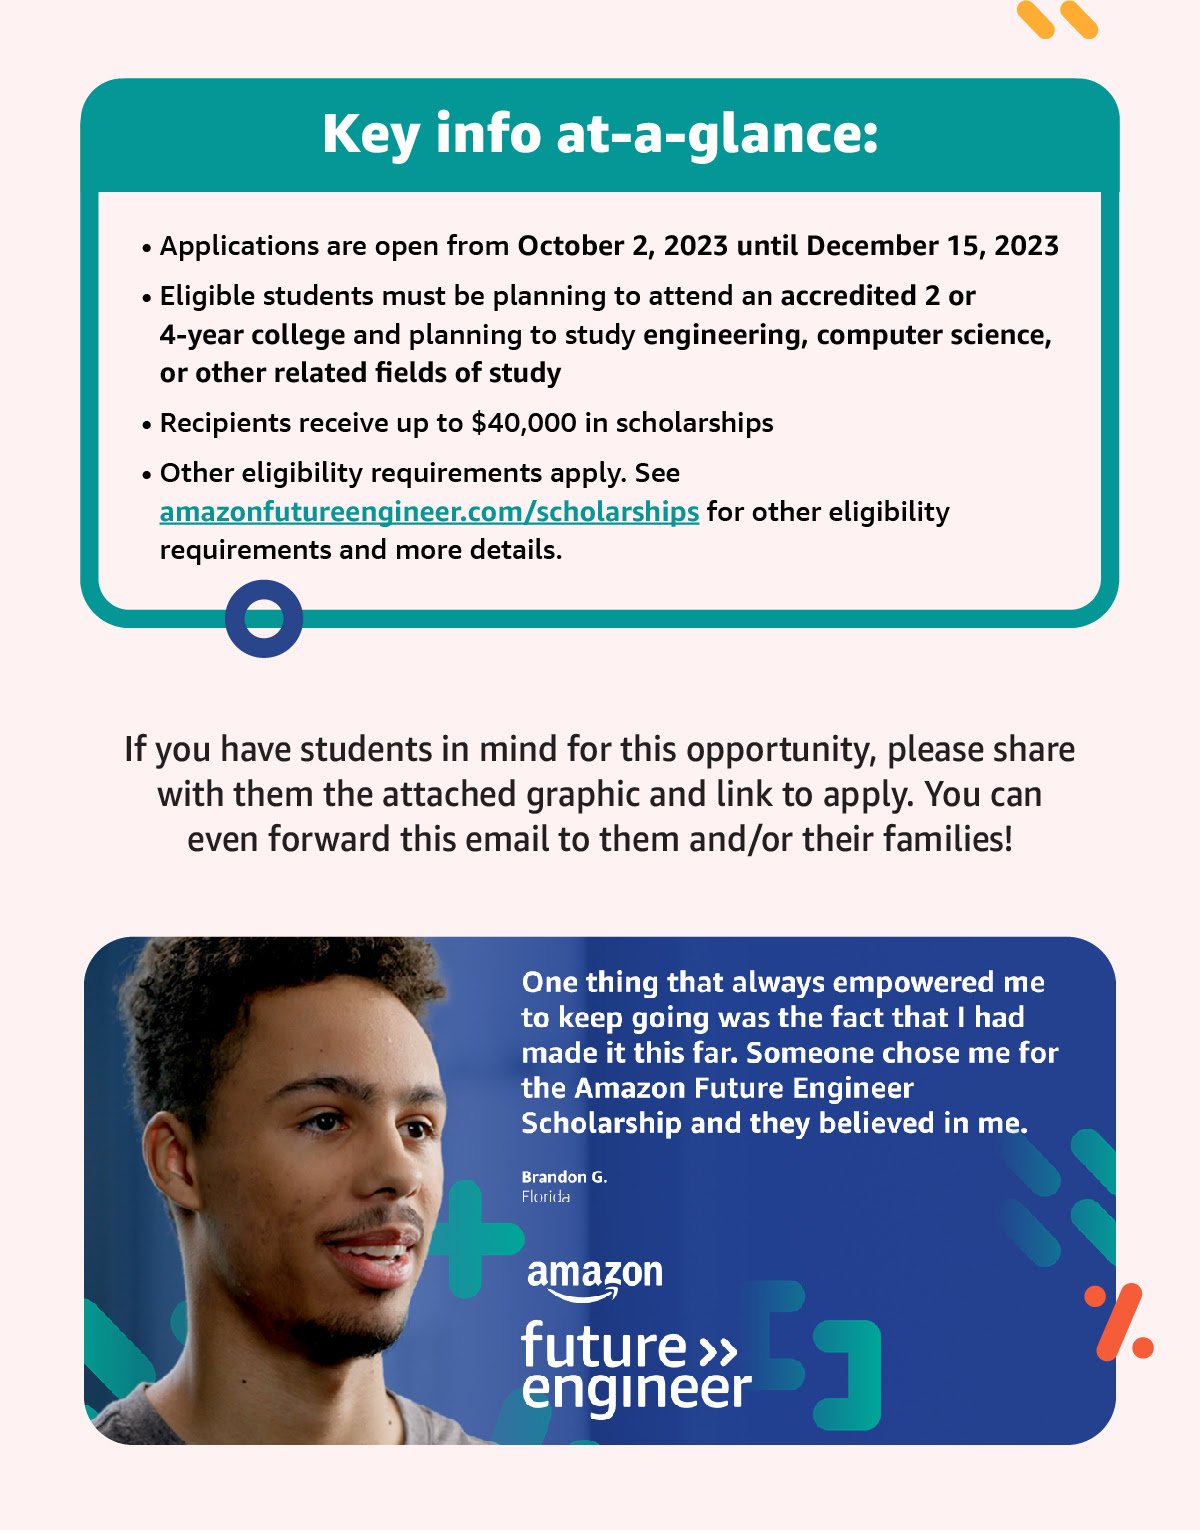 key info at a glance. Apps open from oct 2-dec 15, 2023. must plan to attend an accredited 2 or 4 year college, up to 40k in scholarships. See link for details